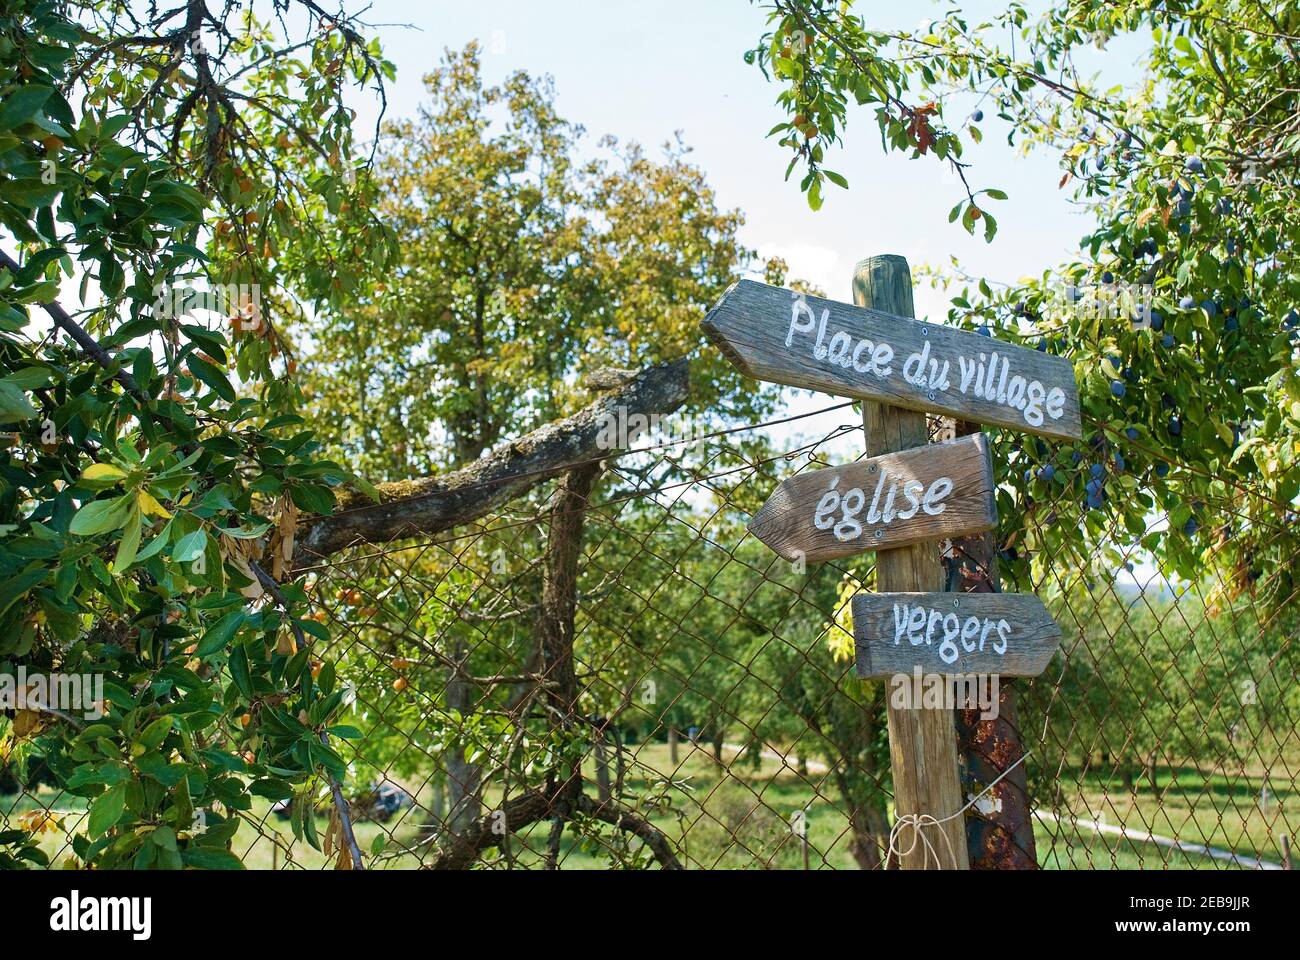 Wooden signpost in Hunspach between the church, orchards and cemetery, Village square, church, orchard Stock Photo